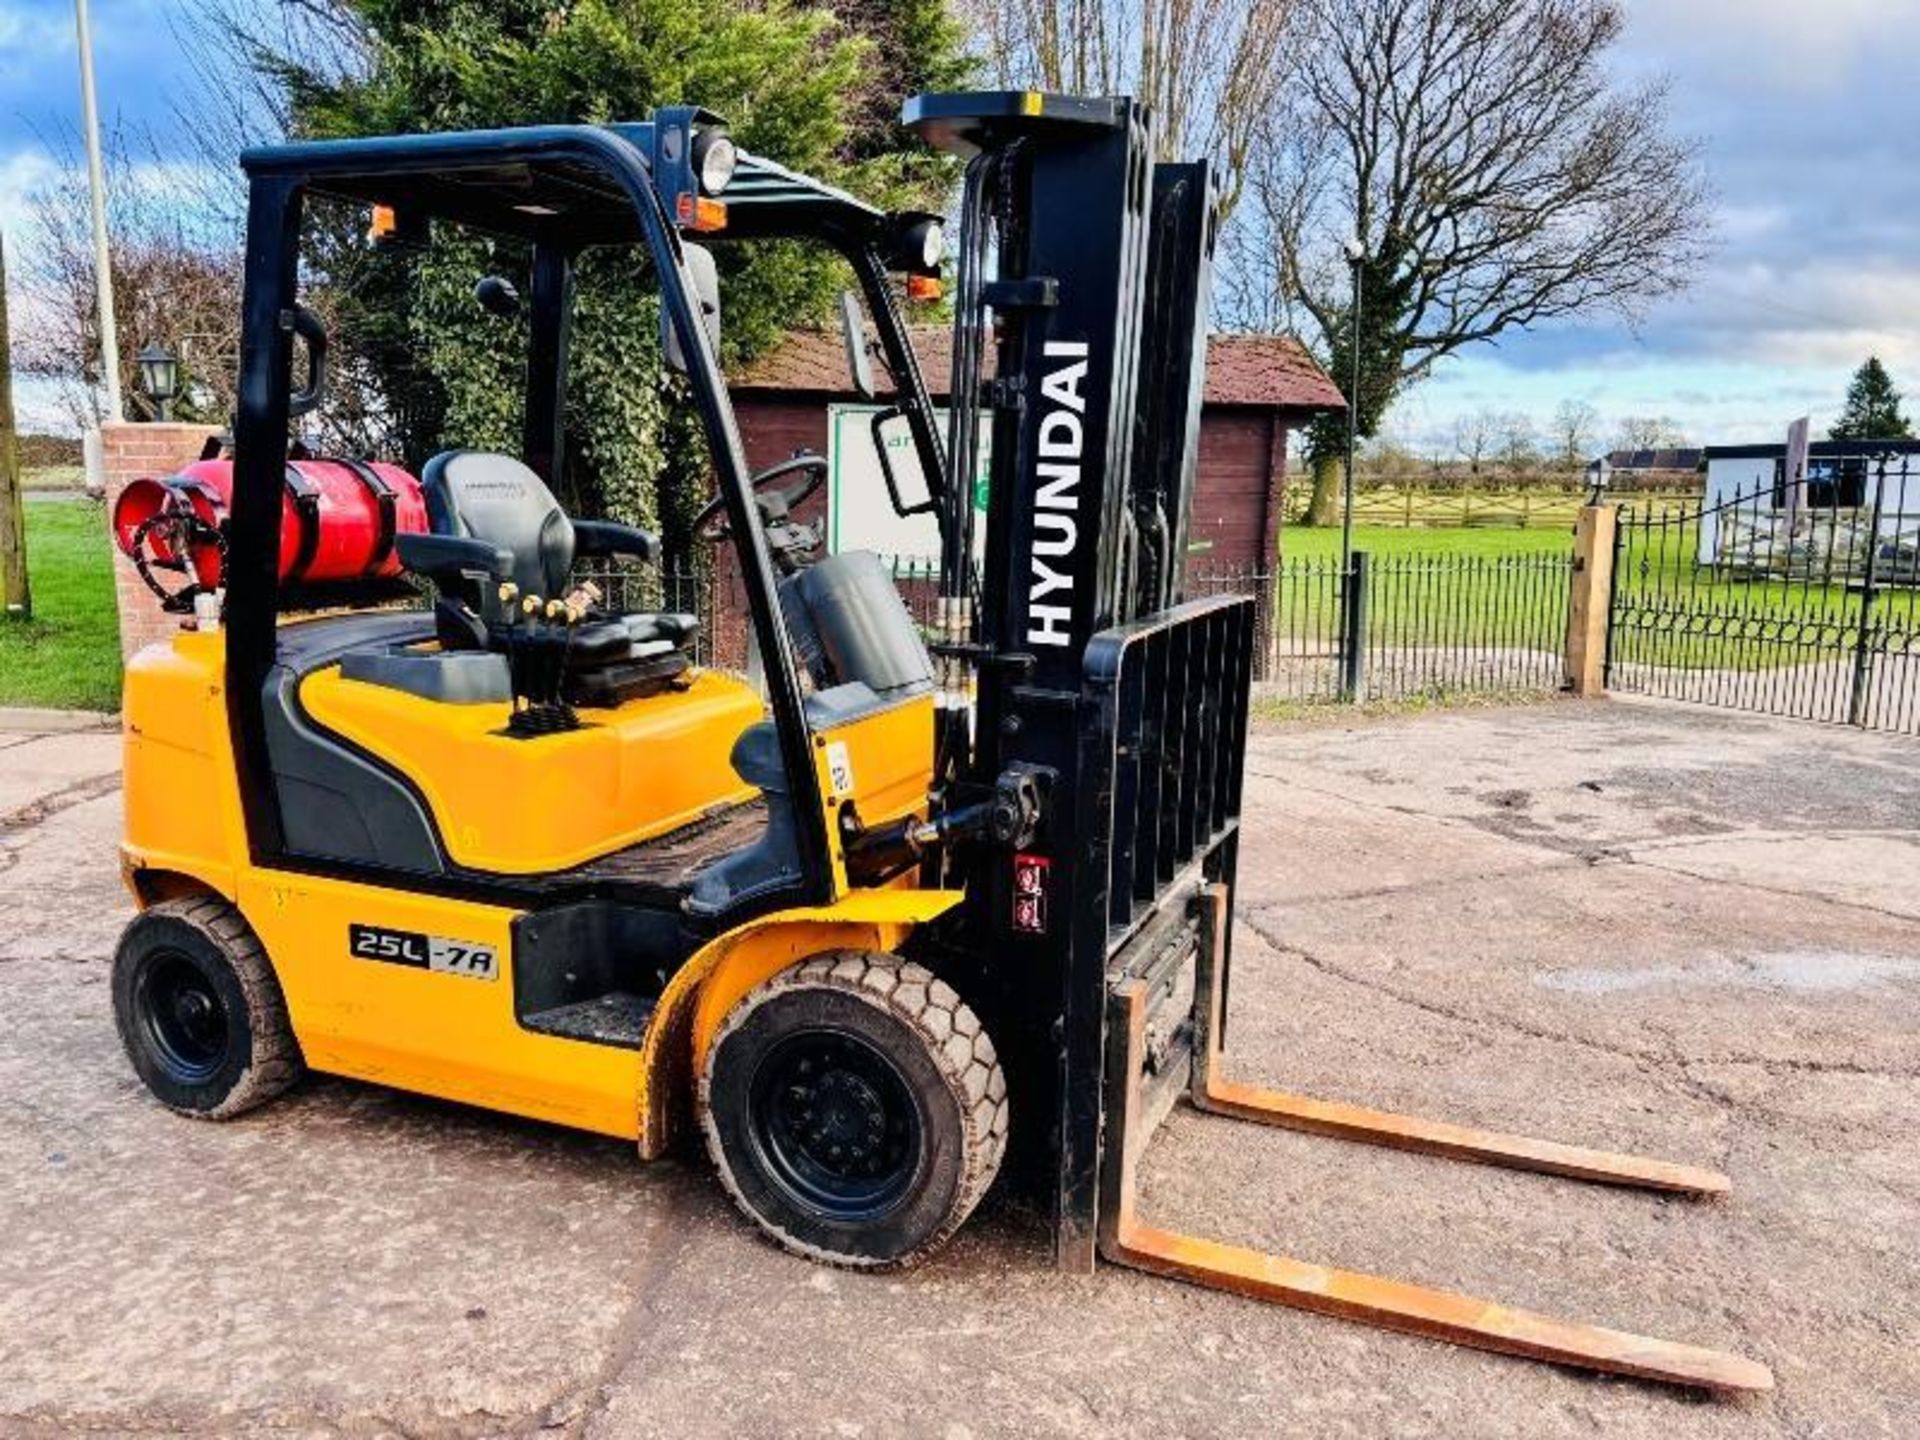 HYUNDAI 25L-7A CONTAINER SPEC FORKLIFT *YEAR 2018, 2172 HOURS* C/W SIDE SHIFT - Image 17 of 17